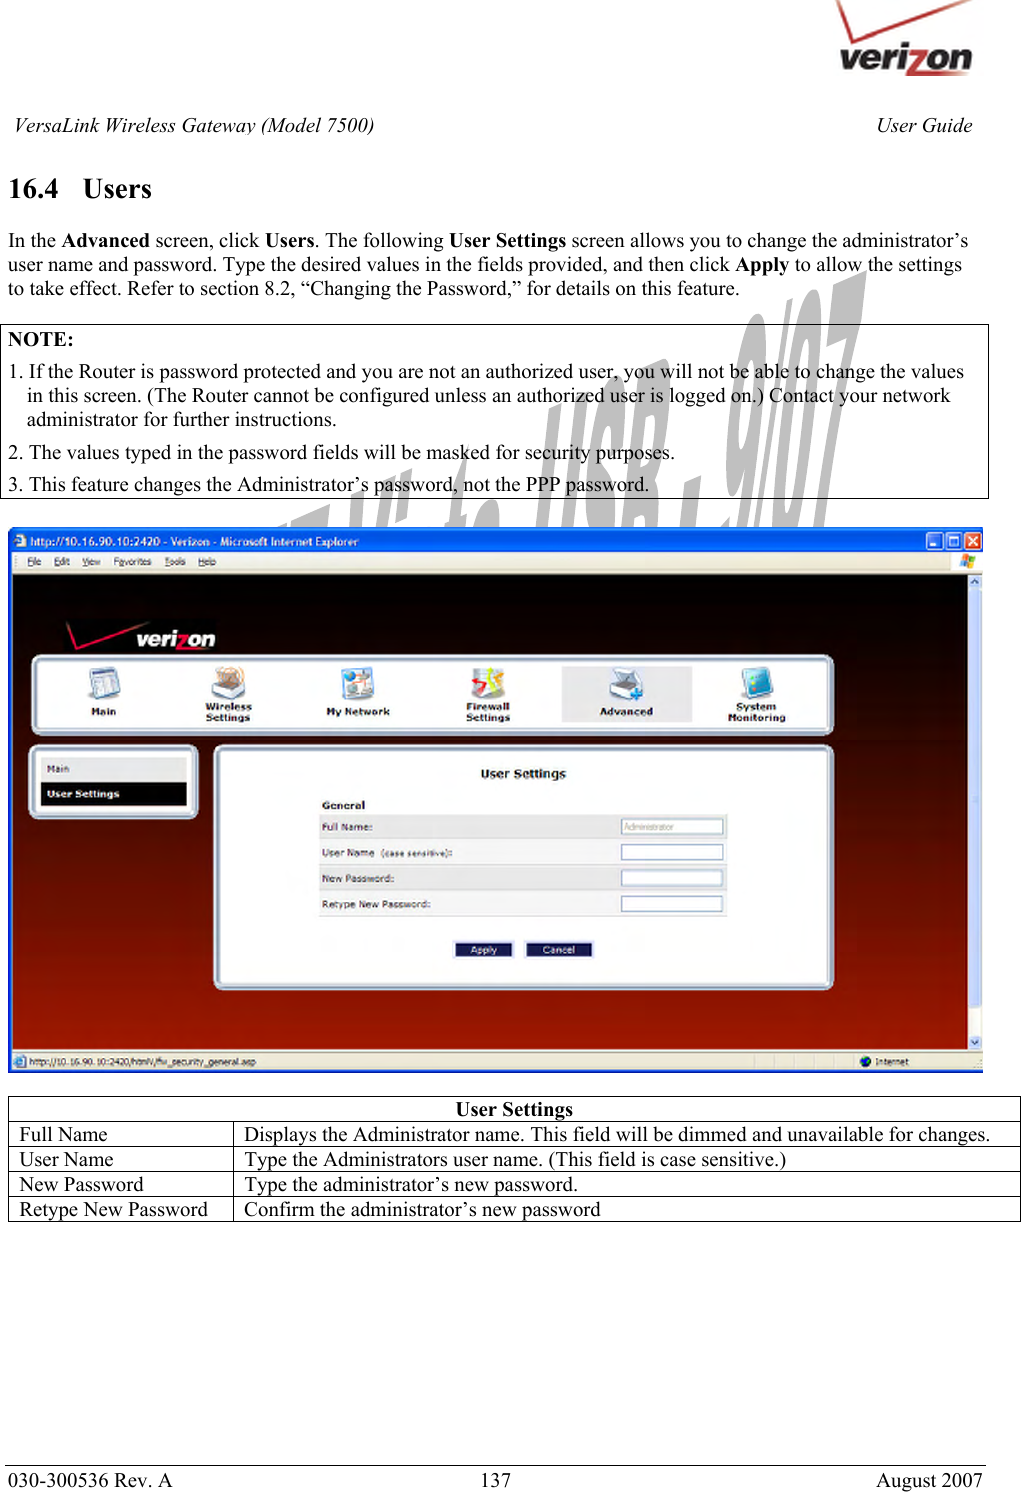       030-300536 Rev. A  137       August 2007 User GuideVersaLink Wireless Gateway (Model 7500) 16.4   Users  In the Advanced screen, click Users. The following User Settings screen allows you to change the administrator’s user name and password. Type the desired values in the fields provided, and then click Apply to allow the settings to take effect. Refer to section 8.2, “Changing the Password,” for details on this feature.  NOTE: 1. If the Router is password protected and you are not an authorized user, you will not be able to change the values in this screen. (The Router cannot be configured unless an authorized user is logged on.) Contact your network administrator for further instructions. 2. The values typed in the password fields will be masked for security purposes. 3. This feature changes the Administrator’s password, not the PPP password.    User Settings Full Name  Displays the Administrator name. This field will be dimmed and unavailable for changes. User Name  Type the Administrators user name. (This field is case sensitive.) New Password  Type the administrator’s new password. Retype New Password  Confirm the administrator’s new password           